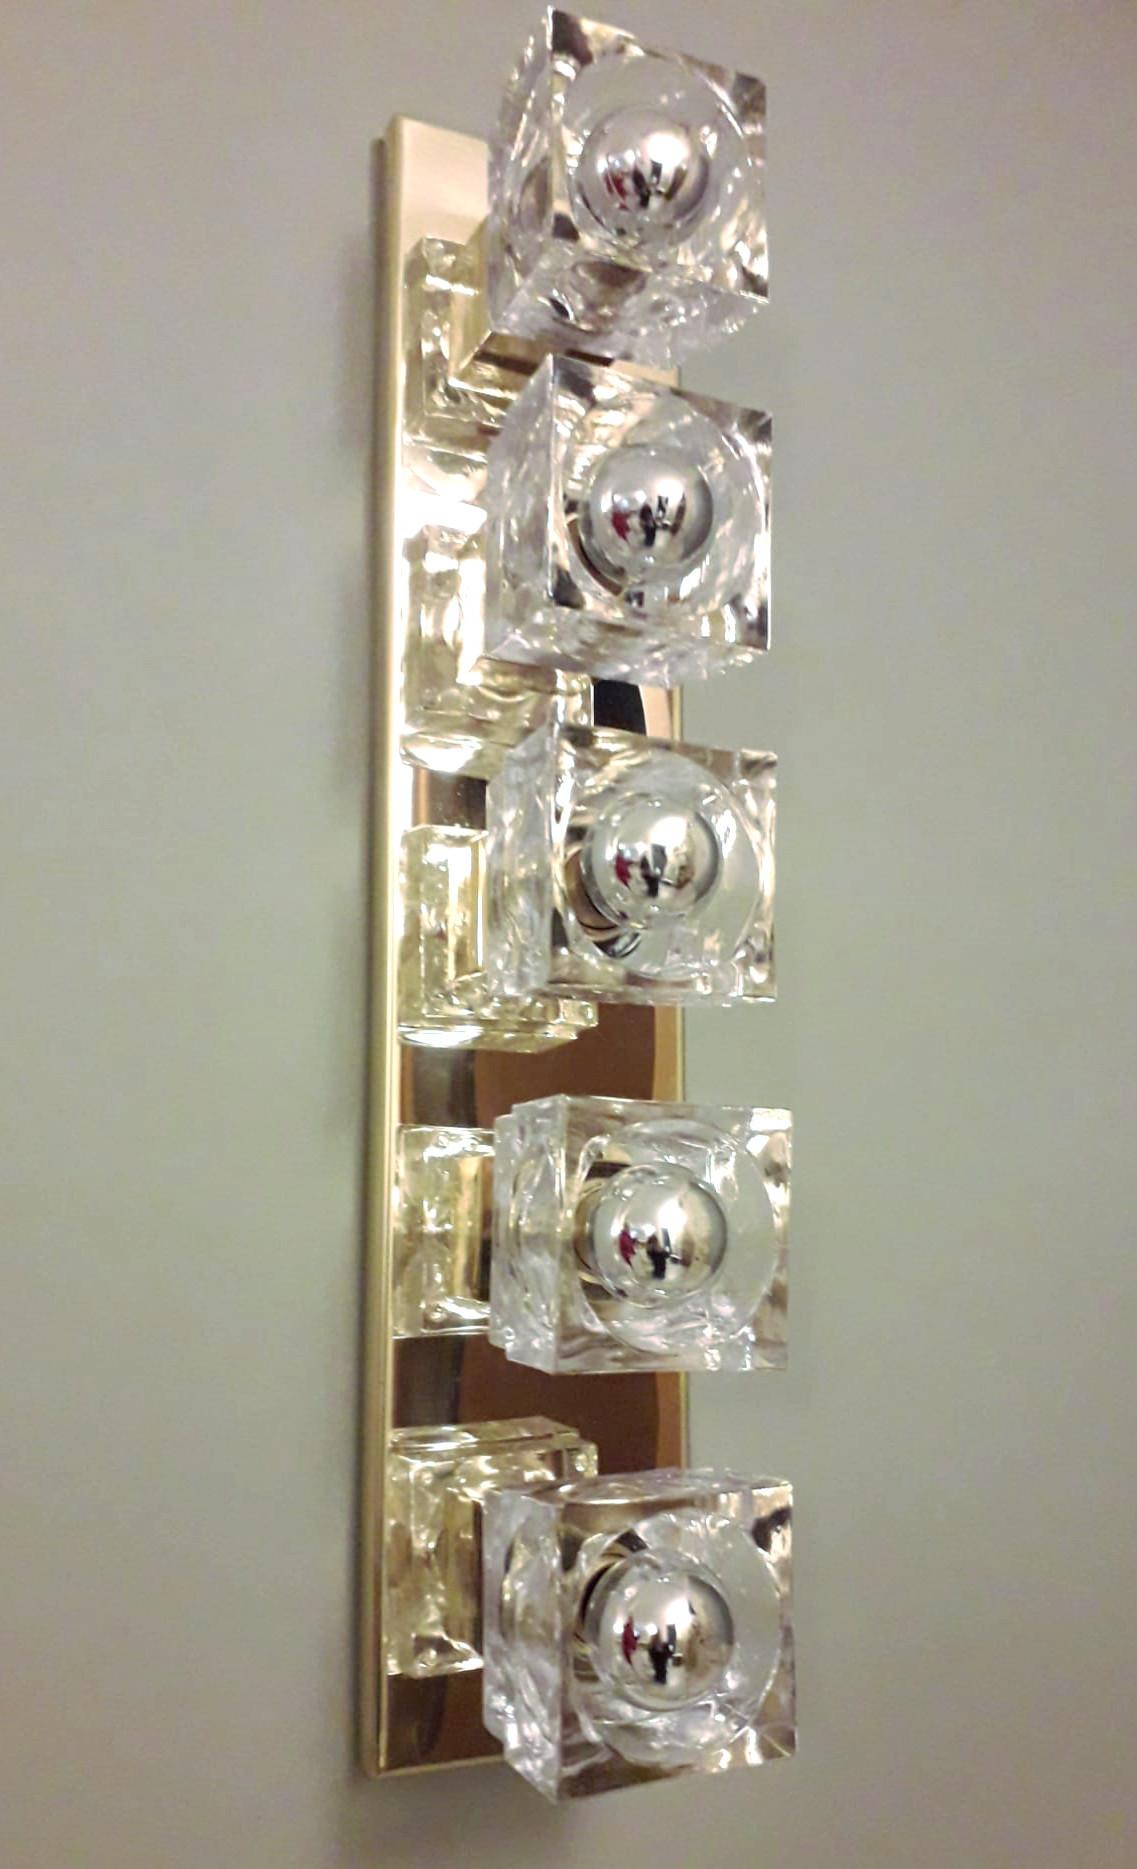 Italian wall sconce or flush mount with Sciolari 1960s vintage clear Murano glass cubes mounted on newly made polished brass frames / Designed by Fabio Bergomi for Fabio Ltd / Made in Italy
5 Lights / E12 or E14 type / max 40W each
Measures: height